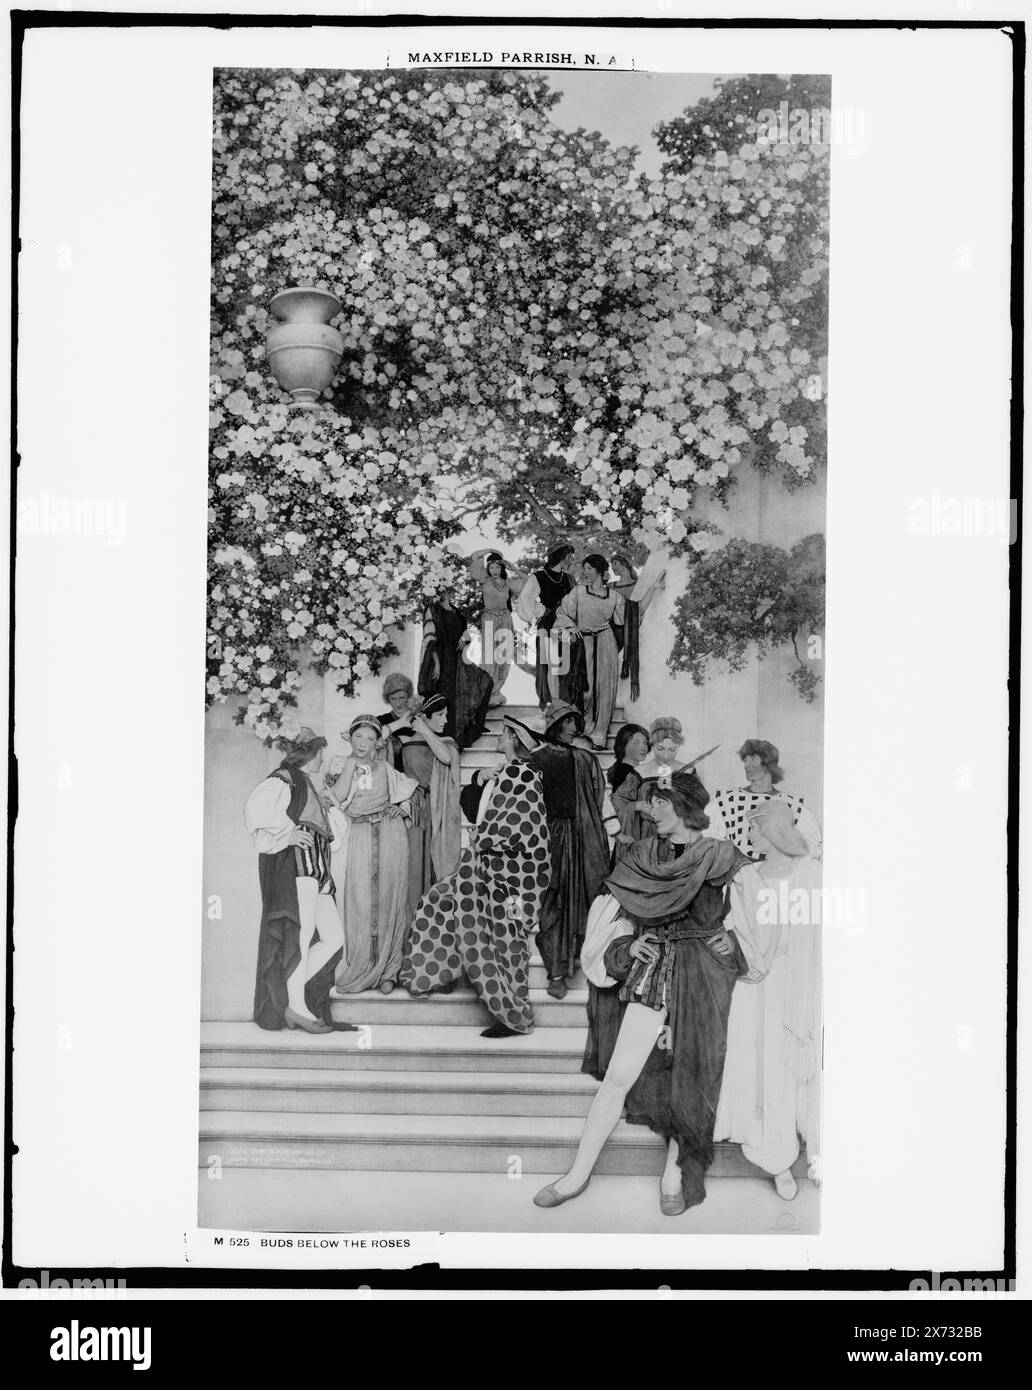 Buds below the roses, Photograph of a mural signed 'Maxfield Parrish' at the Curtis Publishing Company building, Philadelphia, Pa., Detroit Publishing Co. no. M 525., Gift; State Historical Society of Colorado; 1949,  Roses. , Stairways. , Men. , Women. , Murals. Stock Photo